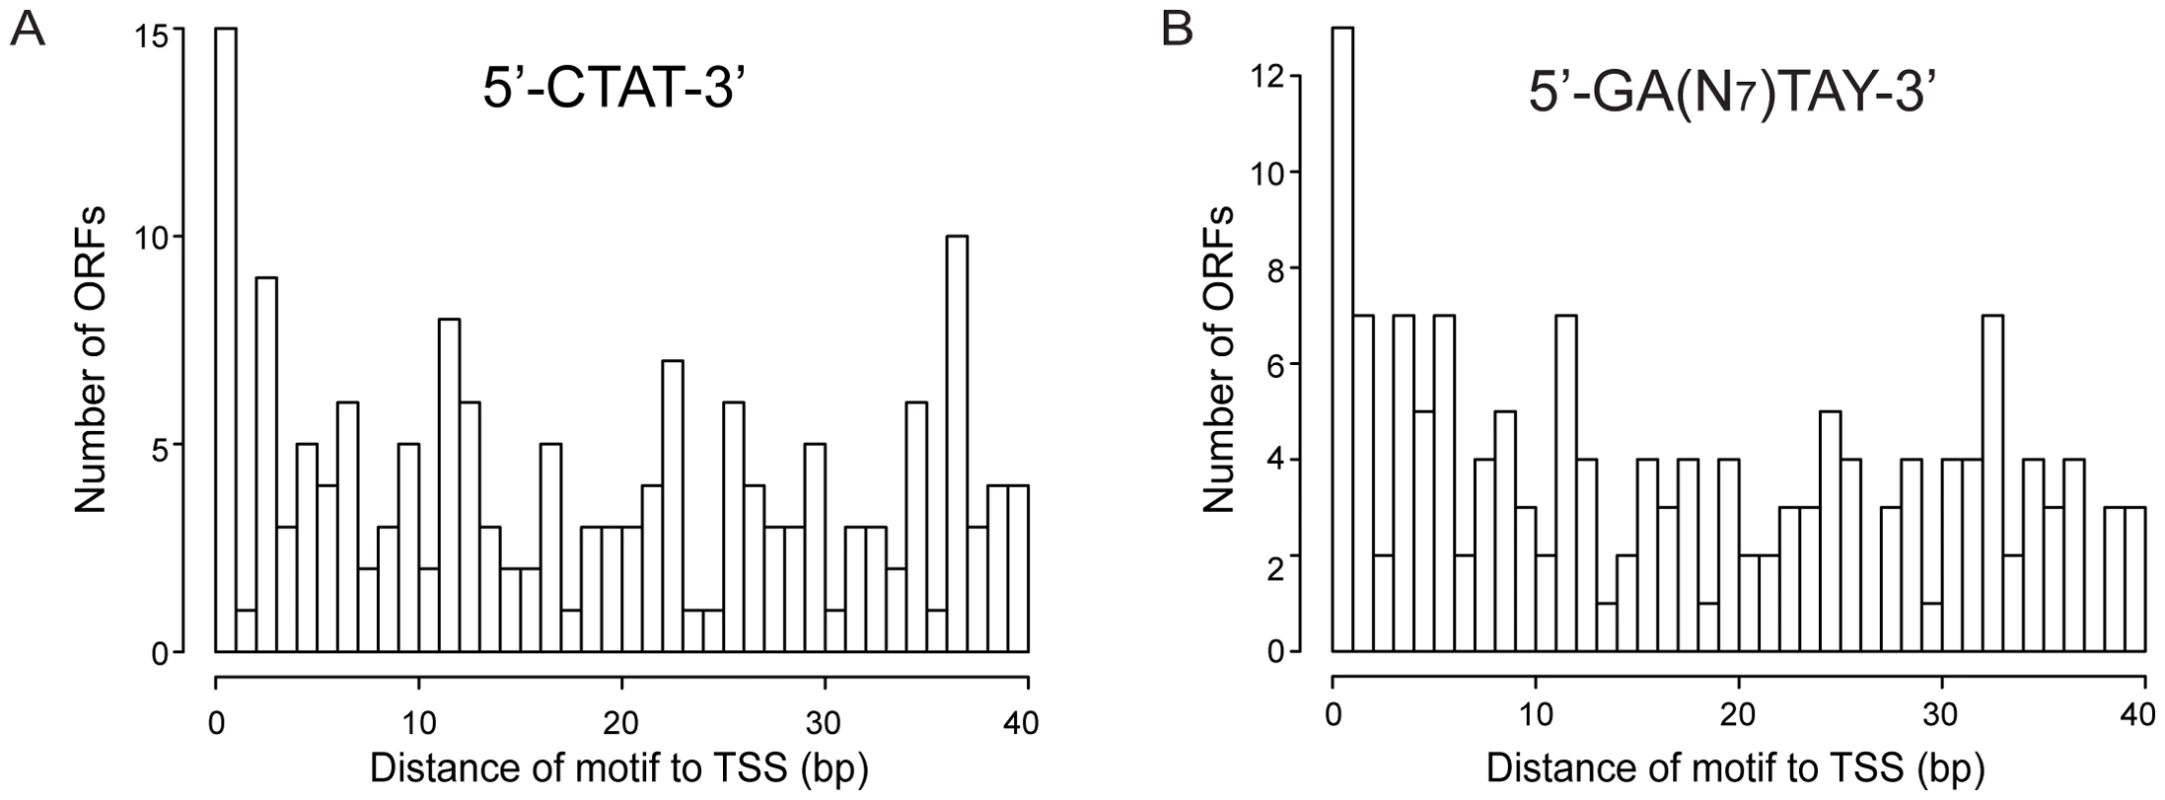 Histogram of distances of methylation motifs to TSS in the promoter regions.